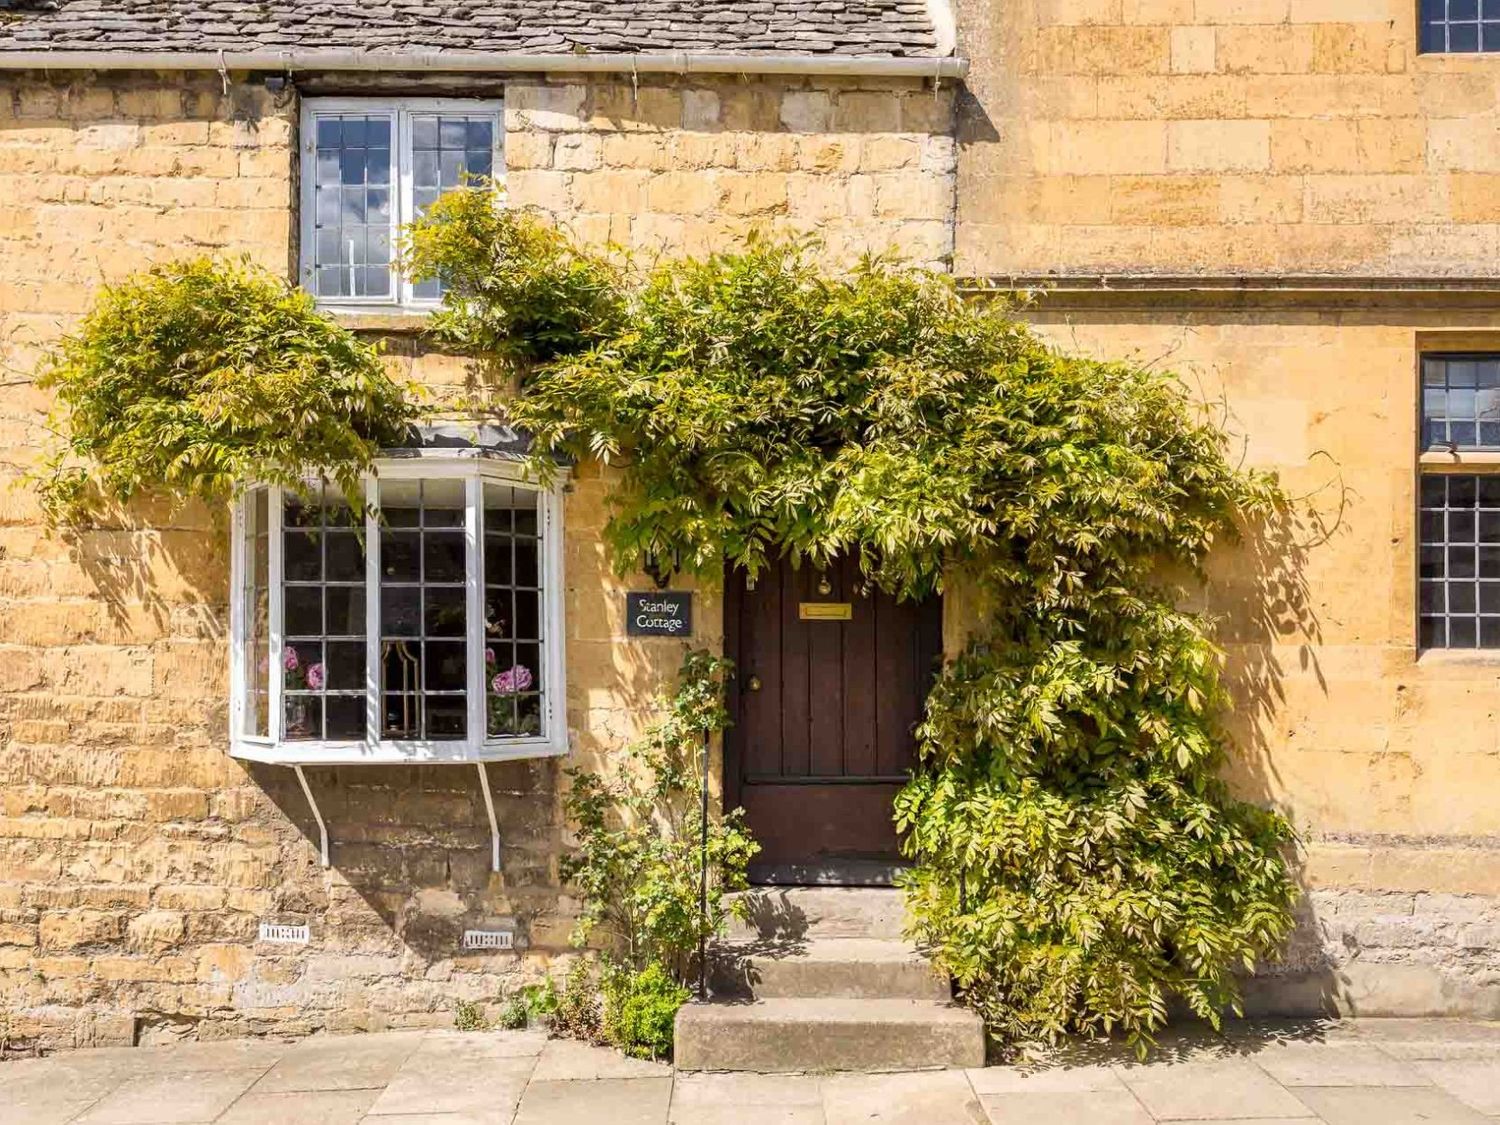 Stanley Cottage - Cotswolds - 1091294 - photo 1